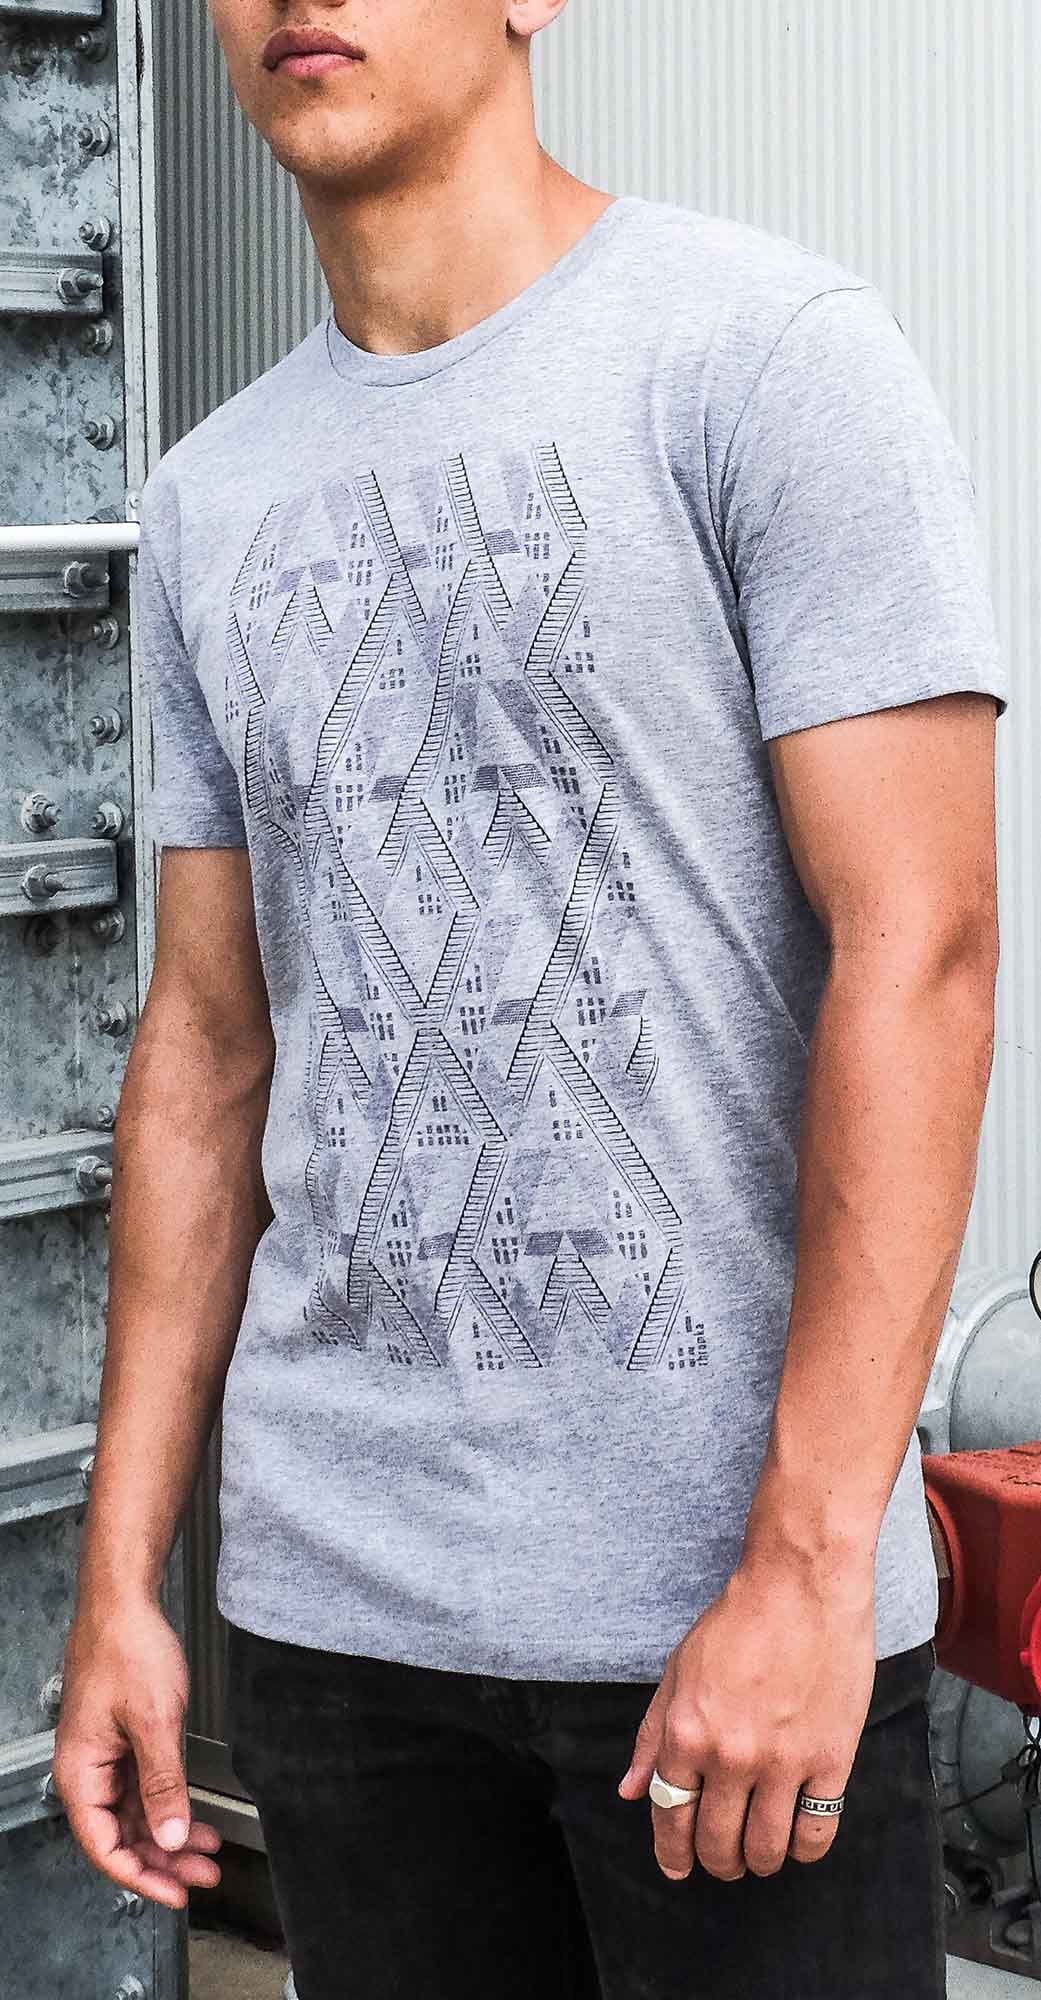 Stairs to Nowhere T-Shirt - Grey Marle